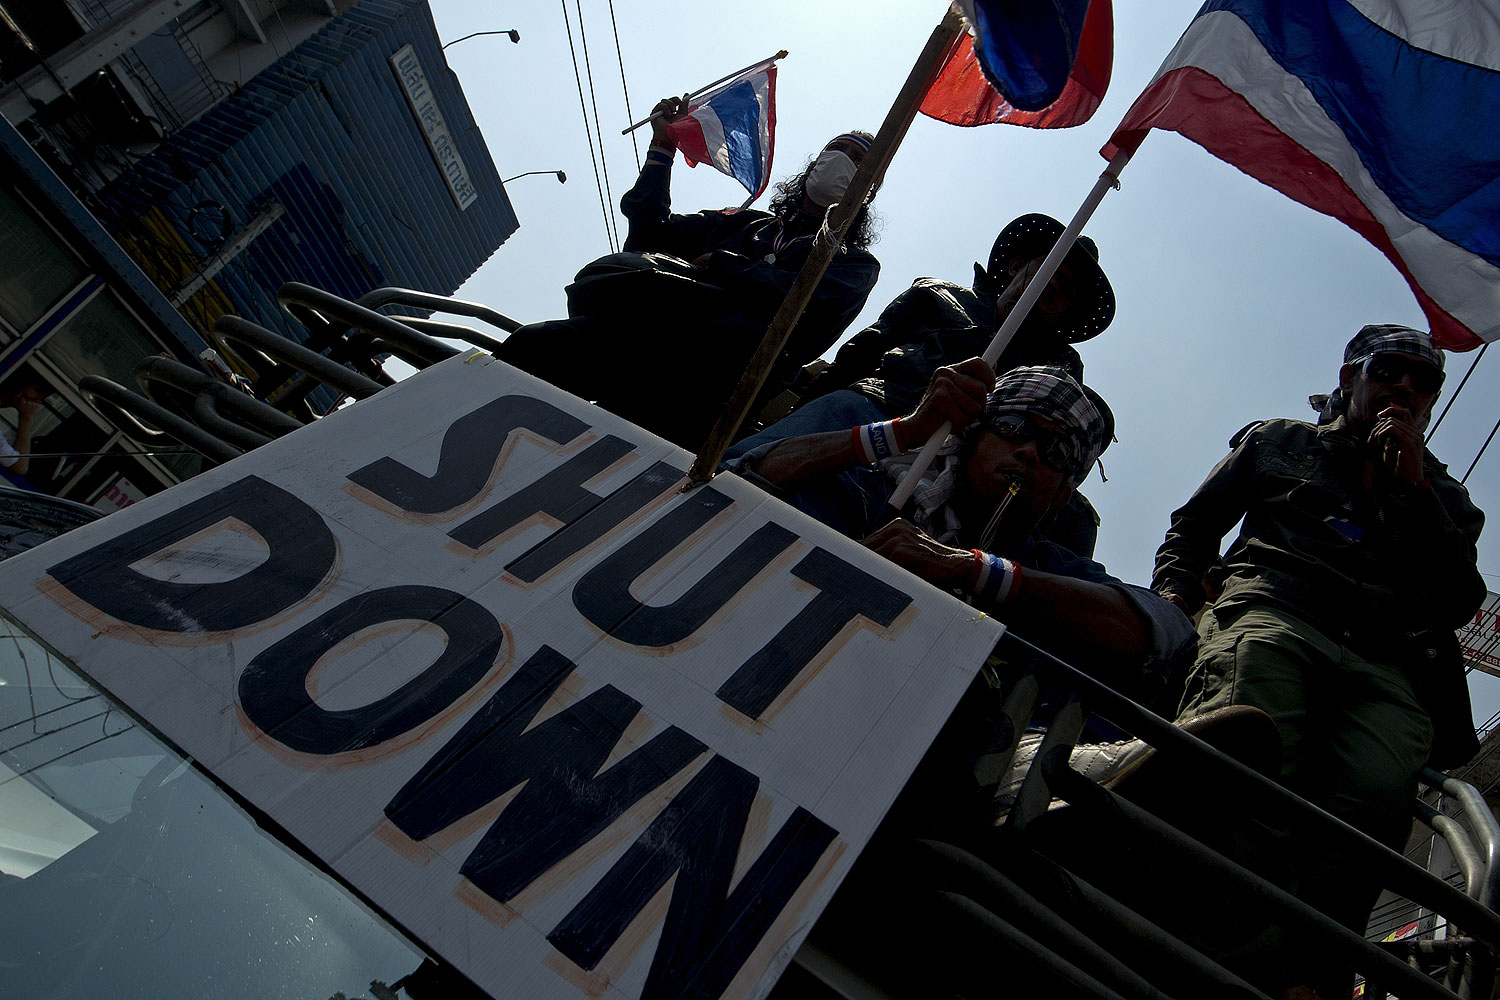 Thai anti-government protesters wave national flags as they parade during a rally in Bangkok on Jan. 24, 2014 (Pornchai Kittiwongsakul / AFP / Getty Images)